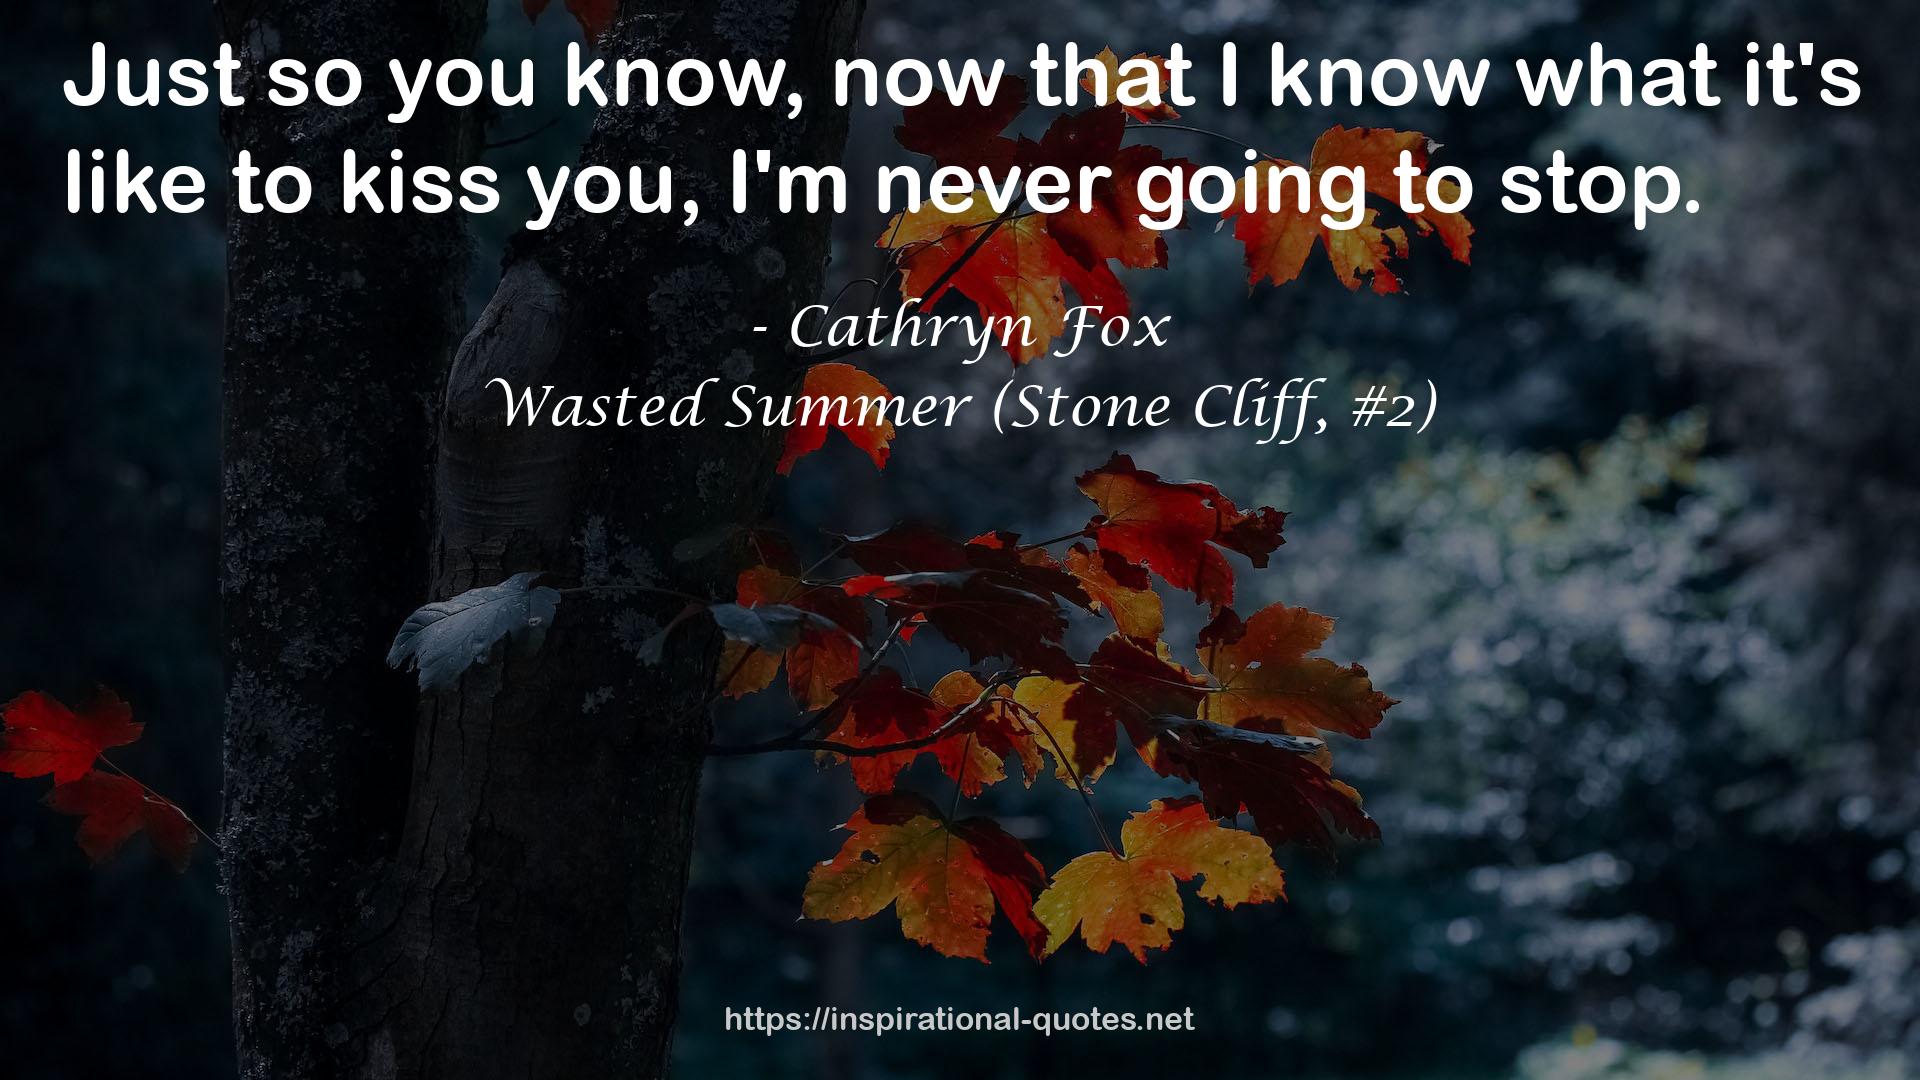 Wasted Summer (Stone Cliff, #2) QUOTES